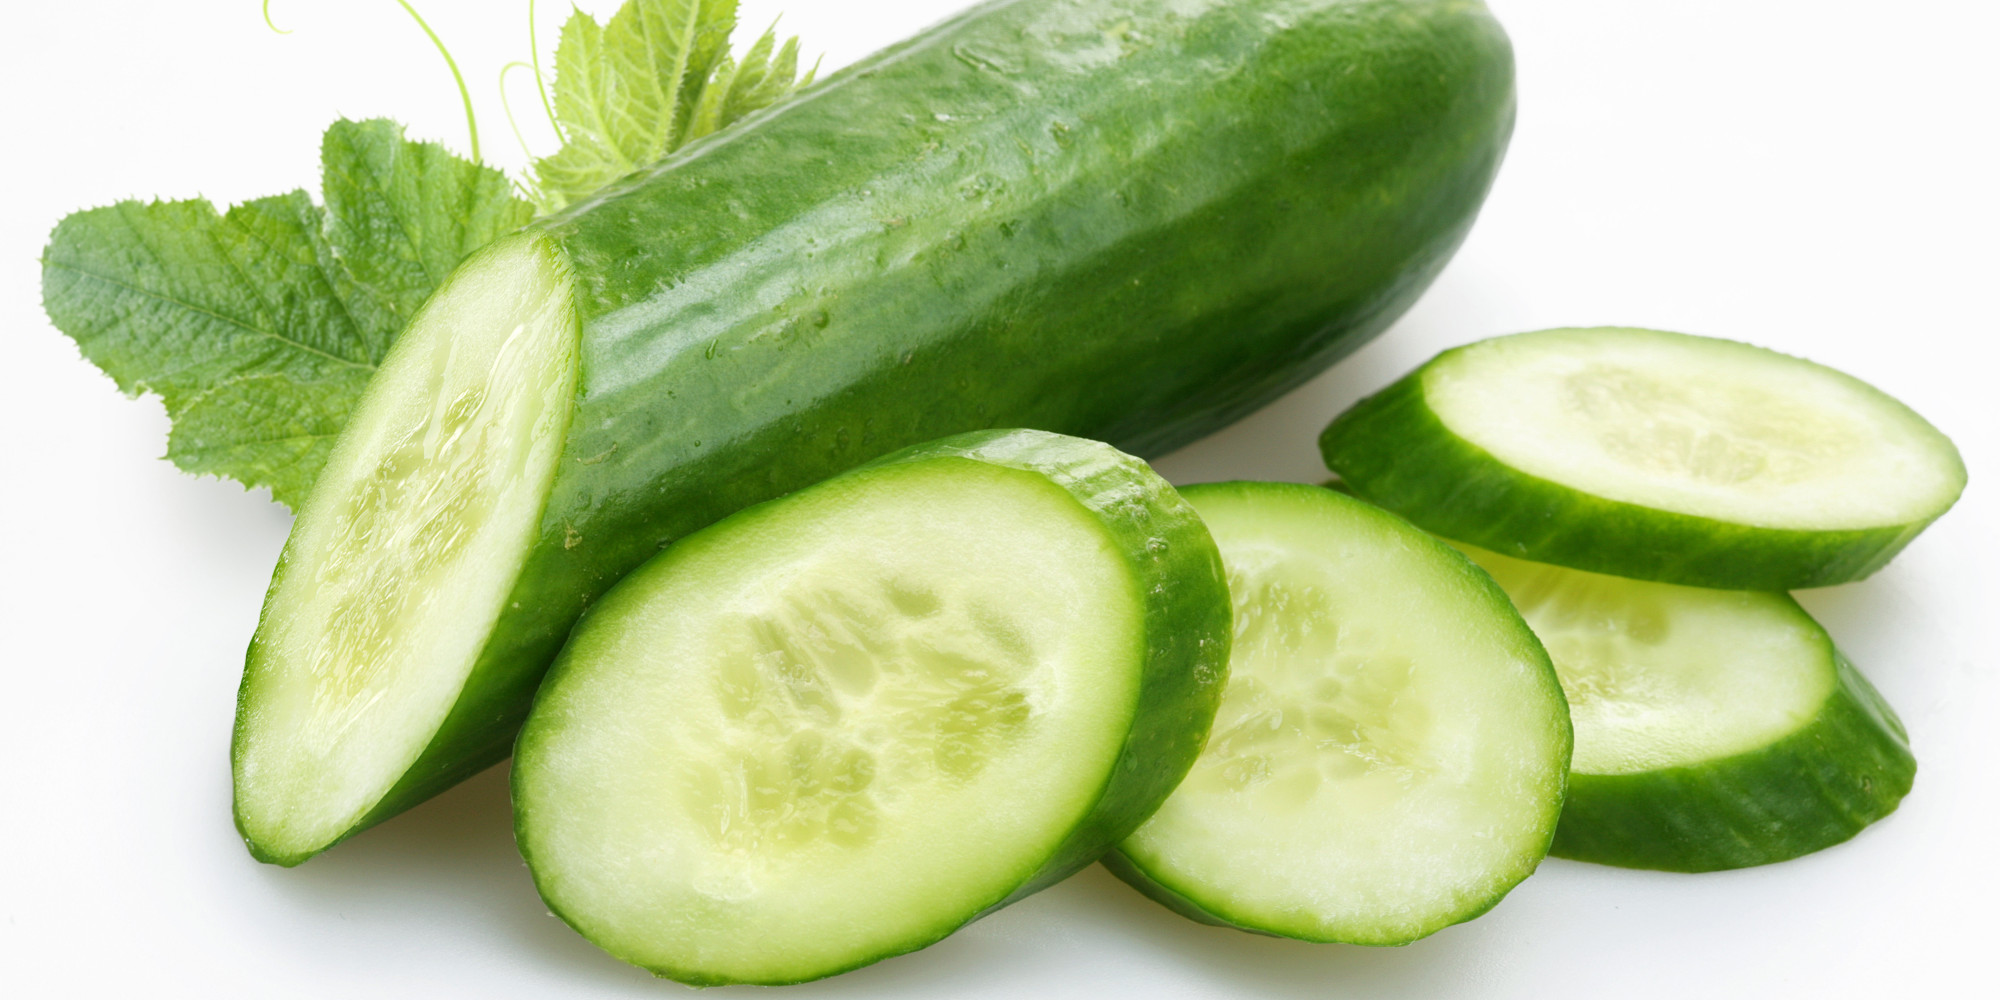 Cucumber Pics, Food Collection